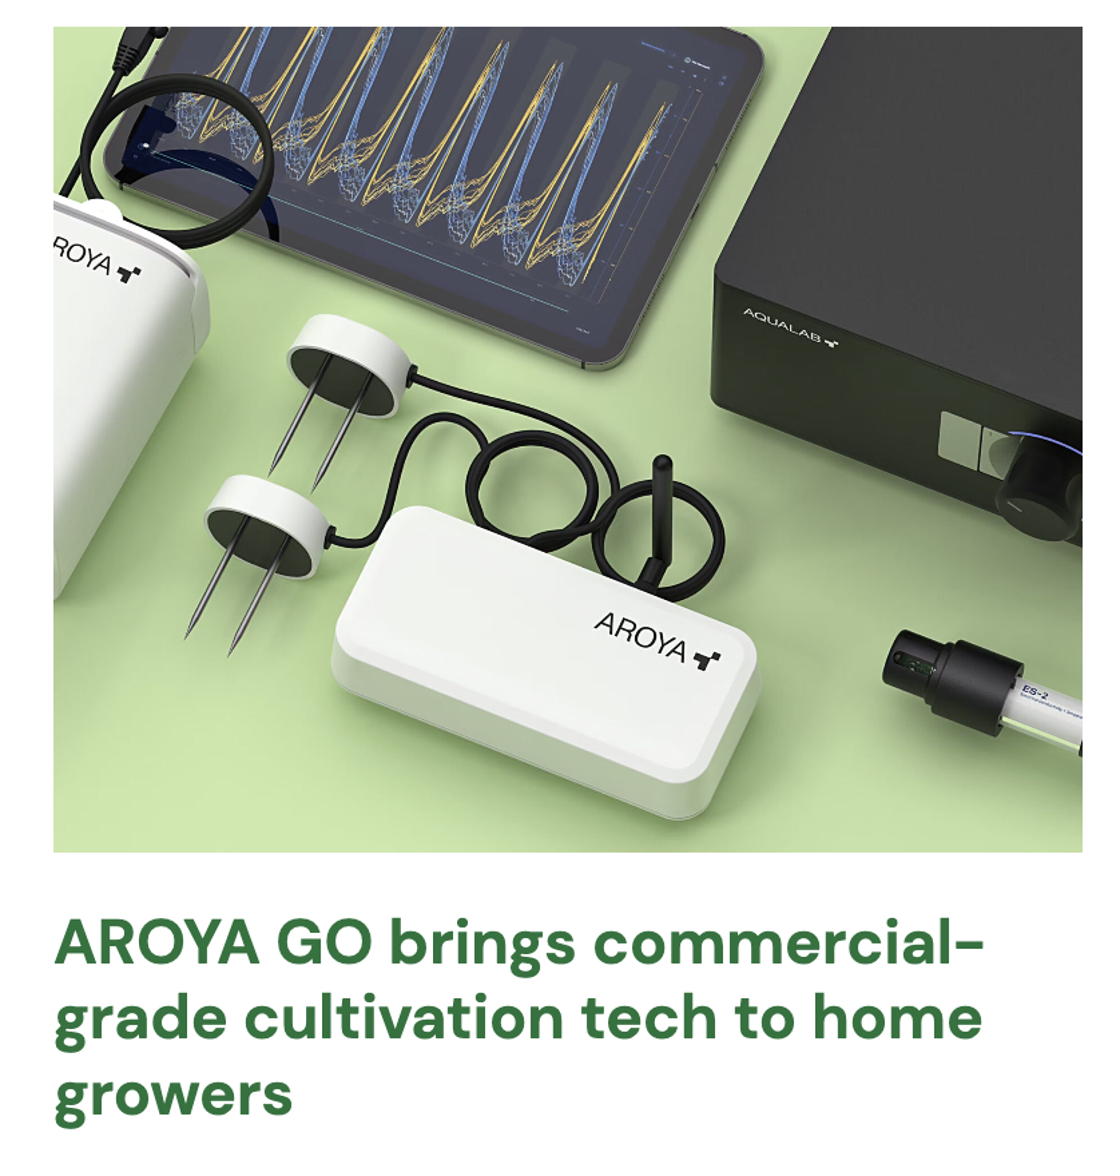 AROYA GO brings commercial-grade cultivation tech to home growers